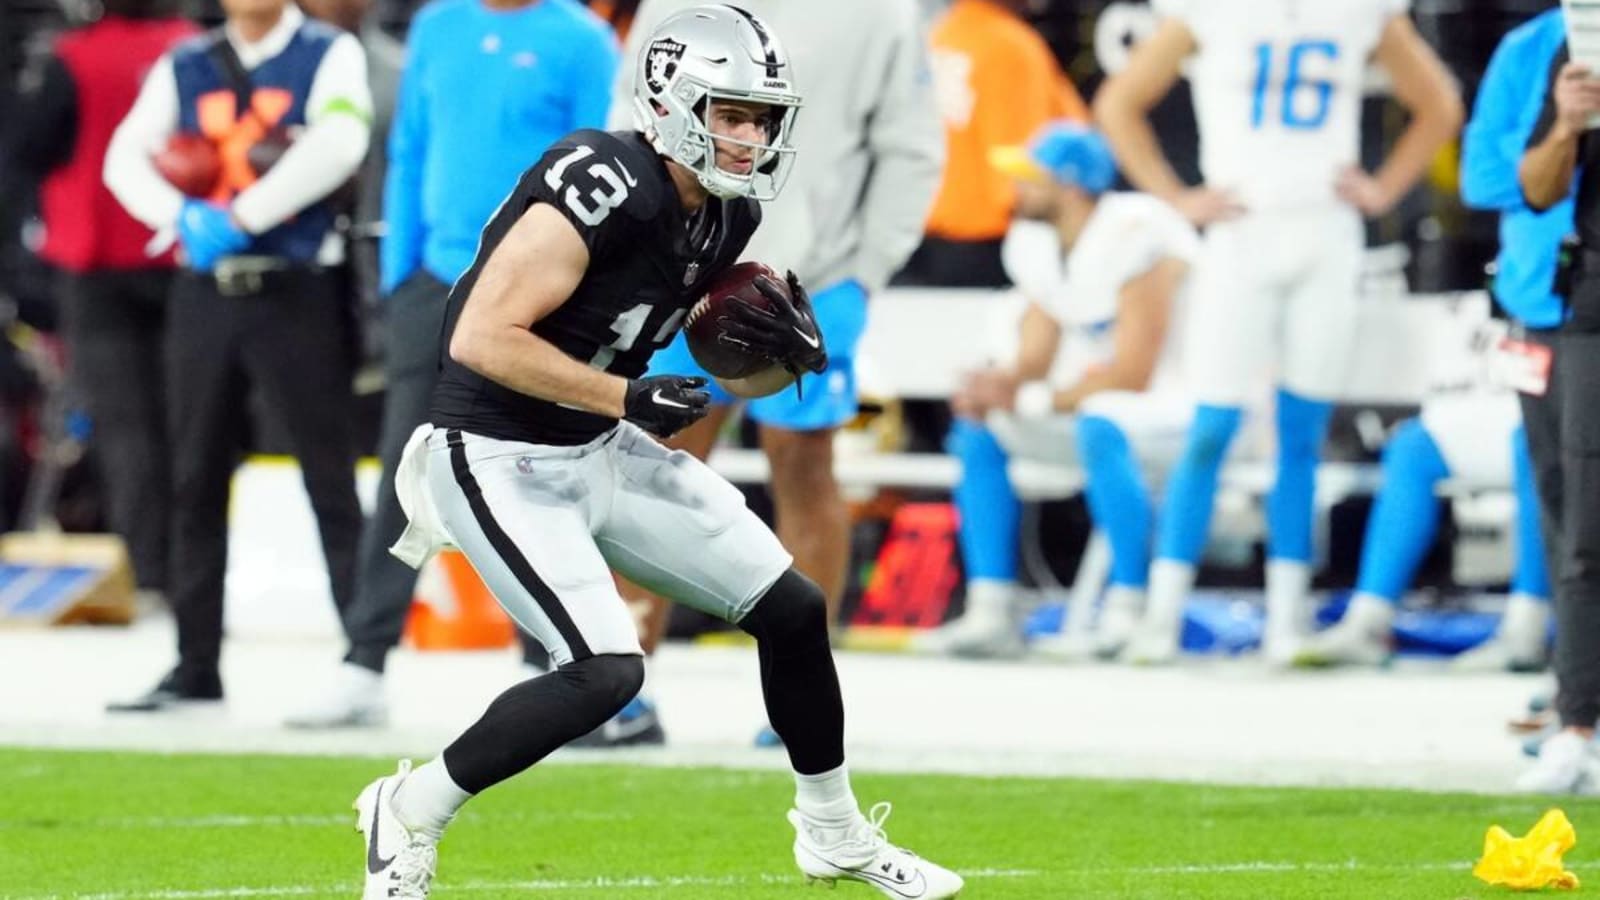 Raiders Under Contract: WR Hunter Renfrow